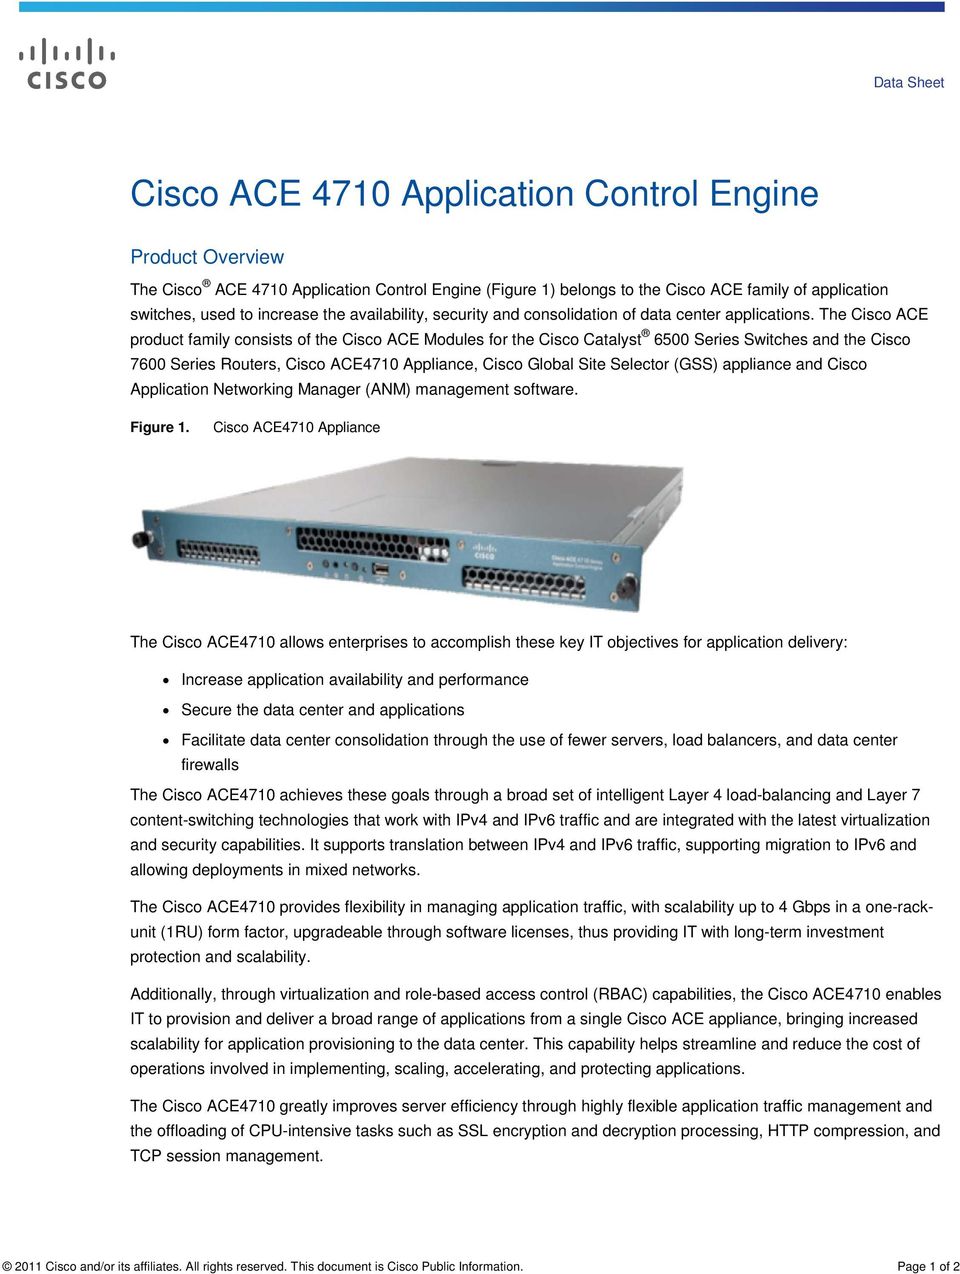 The Cisco ACE product family consists of the Cisco ACE Modules for the Cisco Catalyst 6500 Series Switches and the Cisco 7600 Series Routers, Cisco ACE4710 Appliance, Cisco Global Site Selector (GSS)